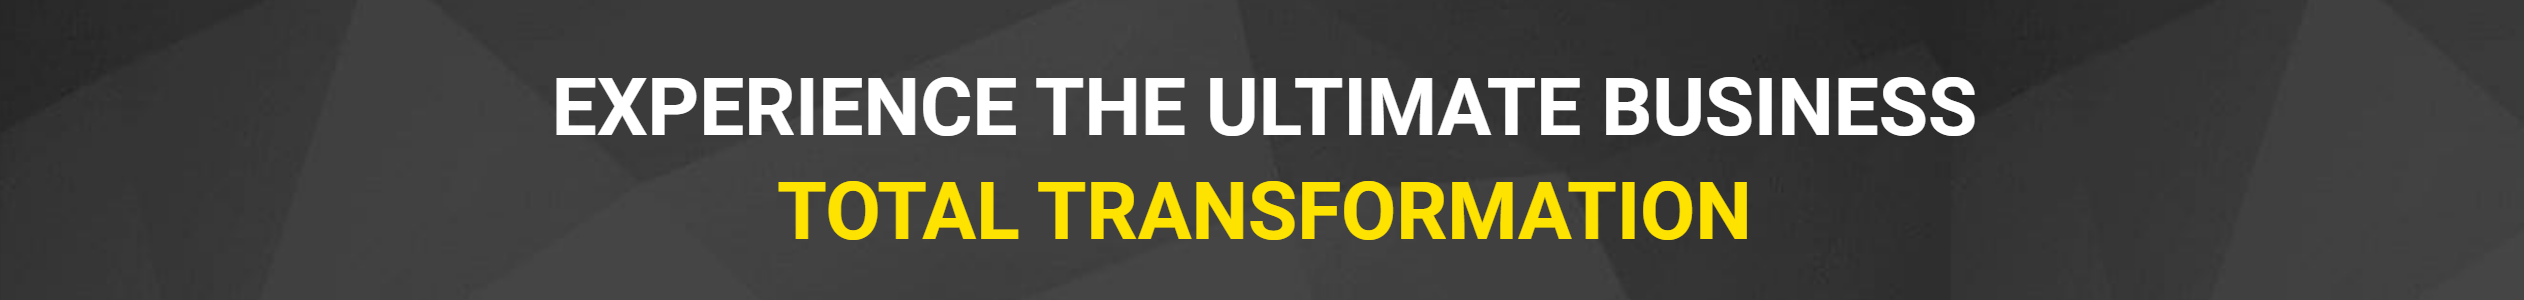 Experience the ultimate Business total Transformation